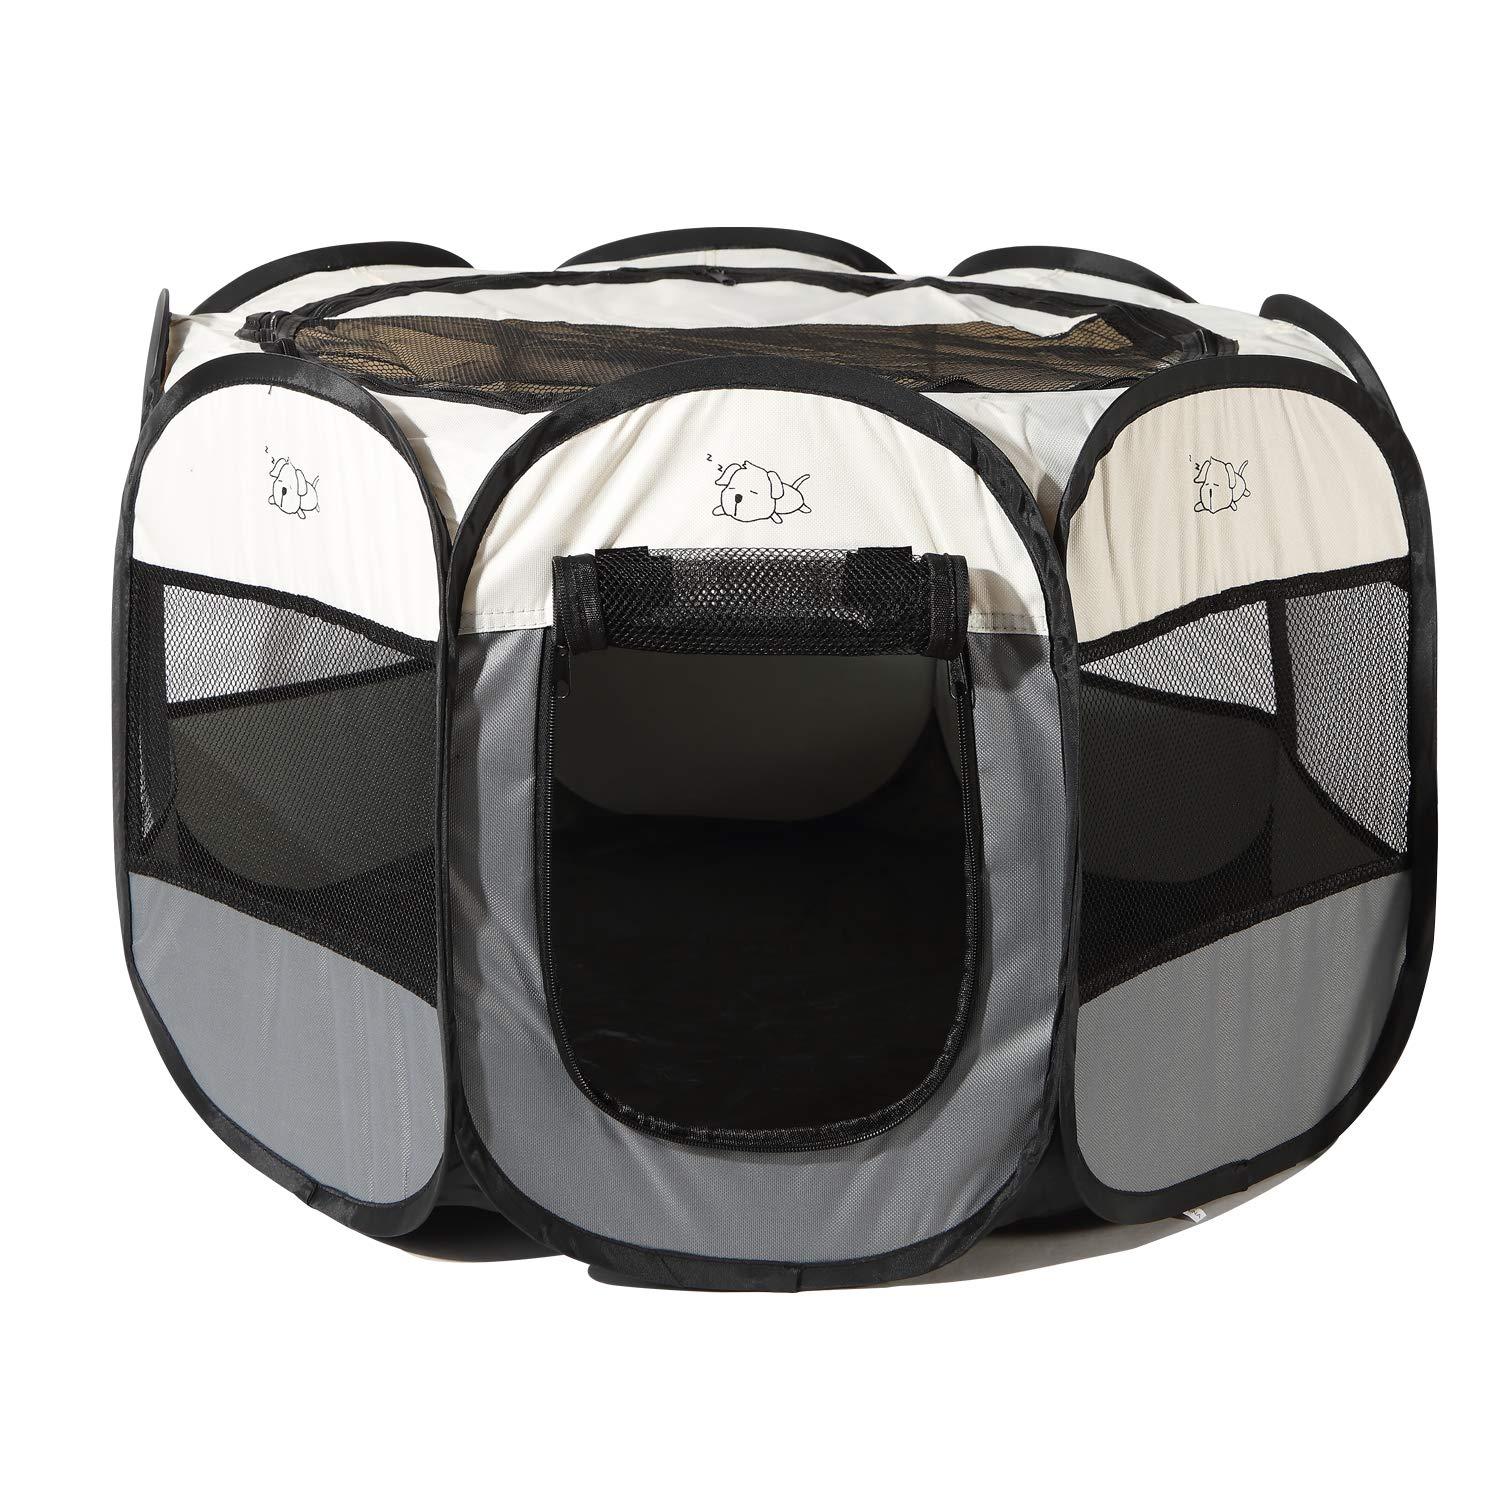 Pet Playpen Portable Foldable Exercise Pen Compatible Small & Large Dog,Kitten,Rabbit,Puppy-Oxford Cage & Kennel Suit Compatible Indoor/Outdoor Use